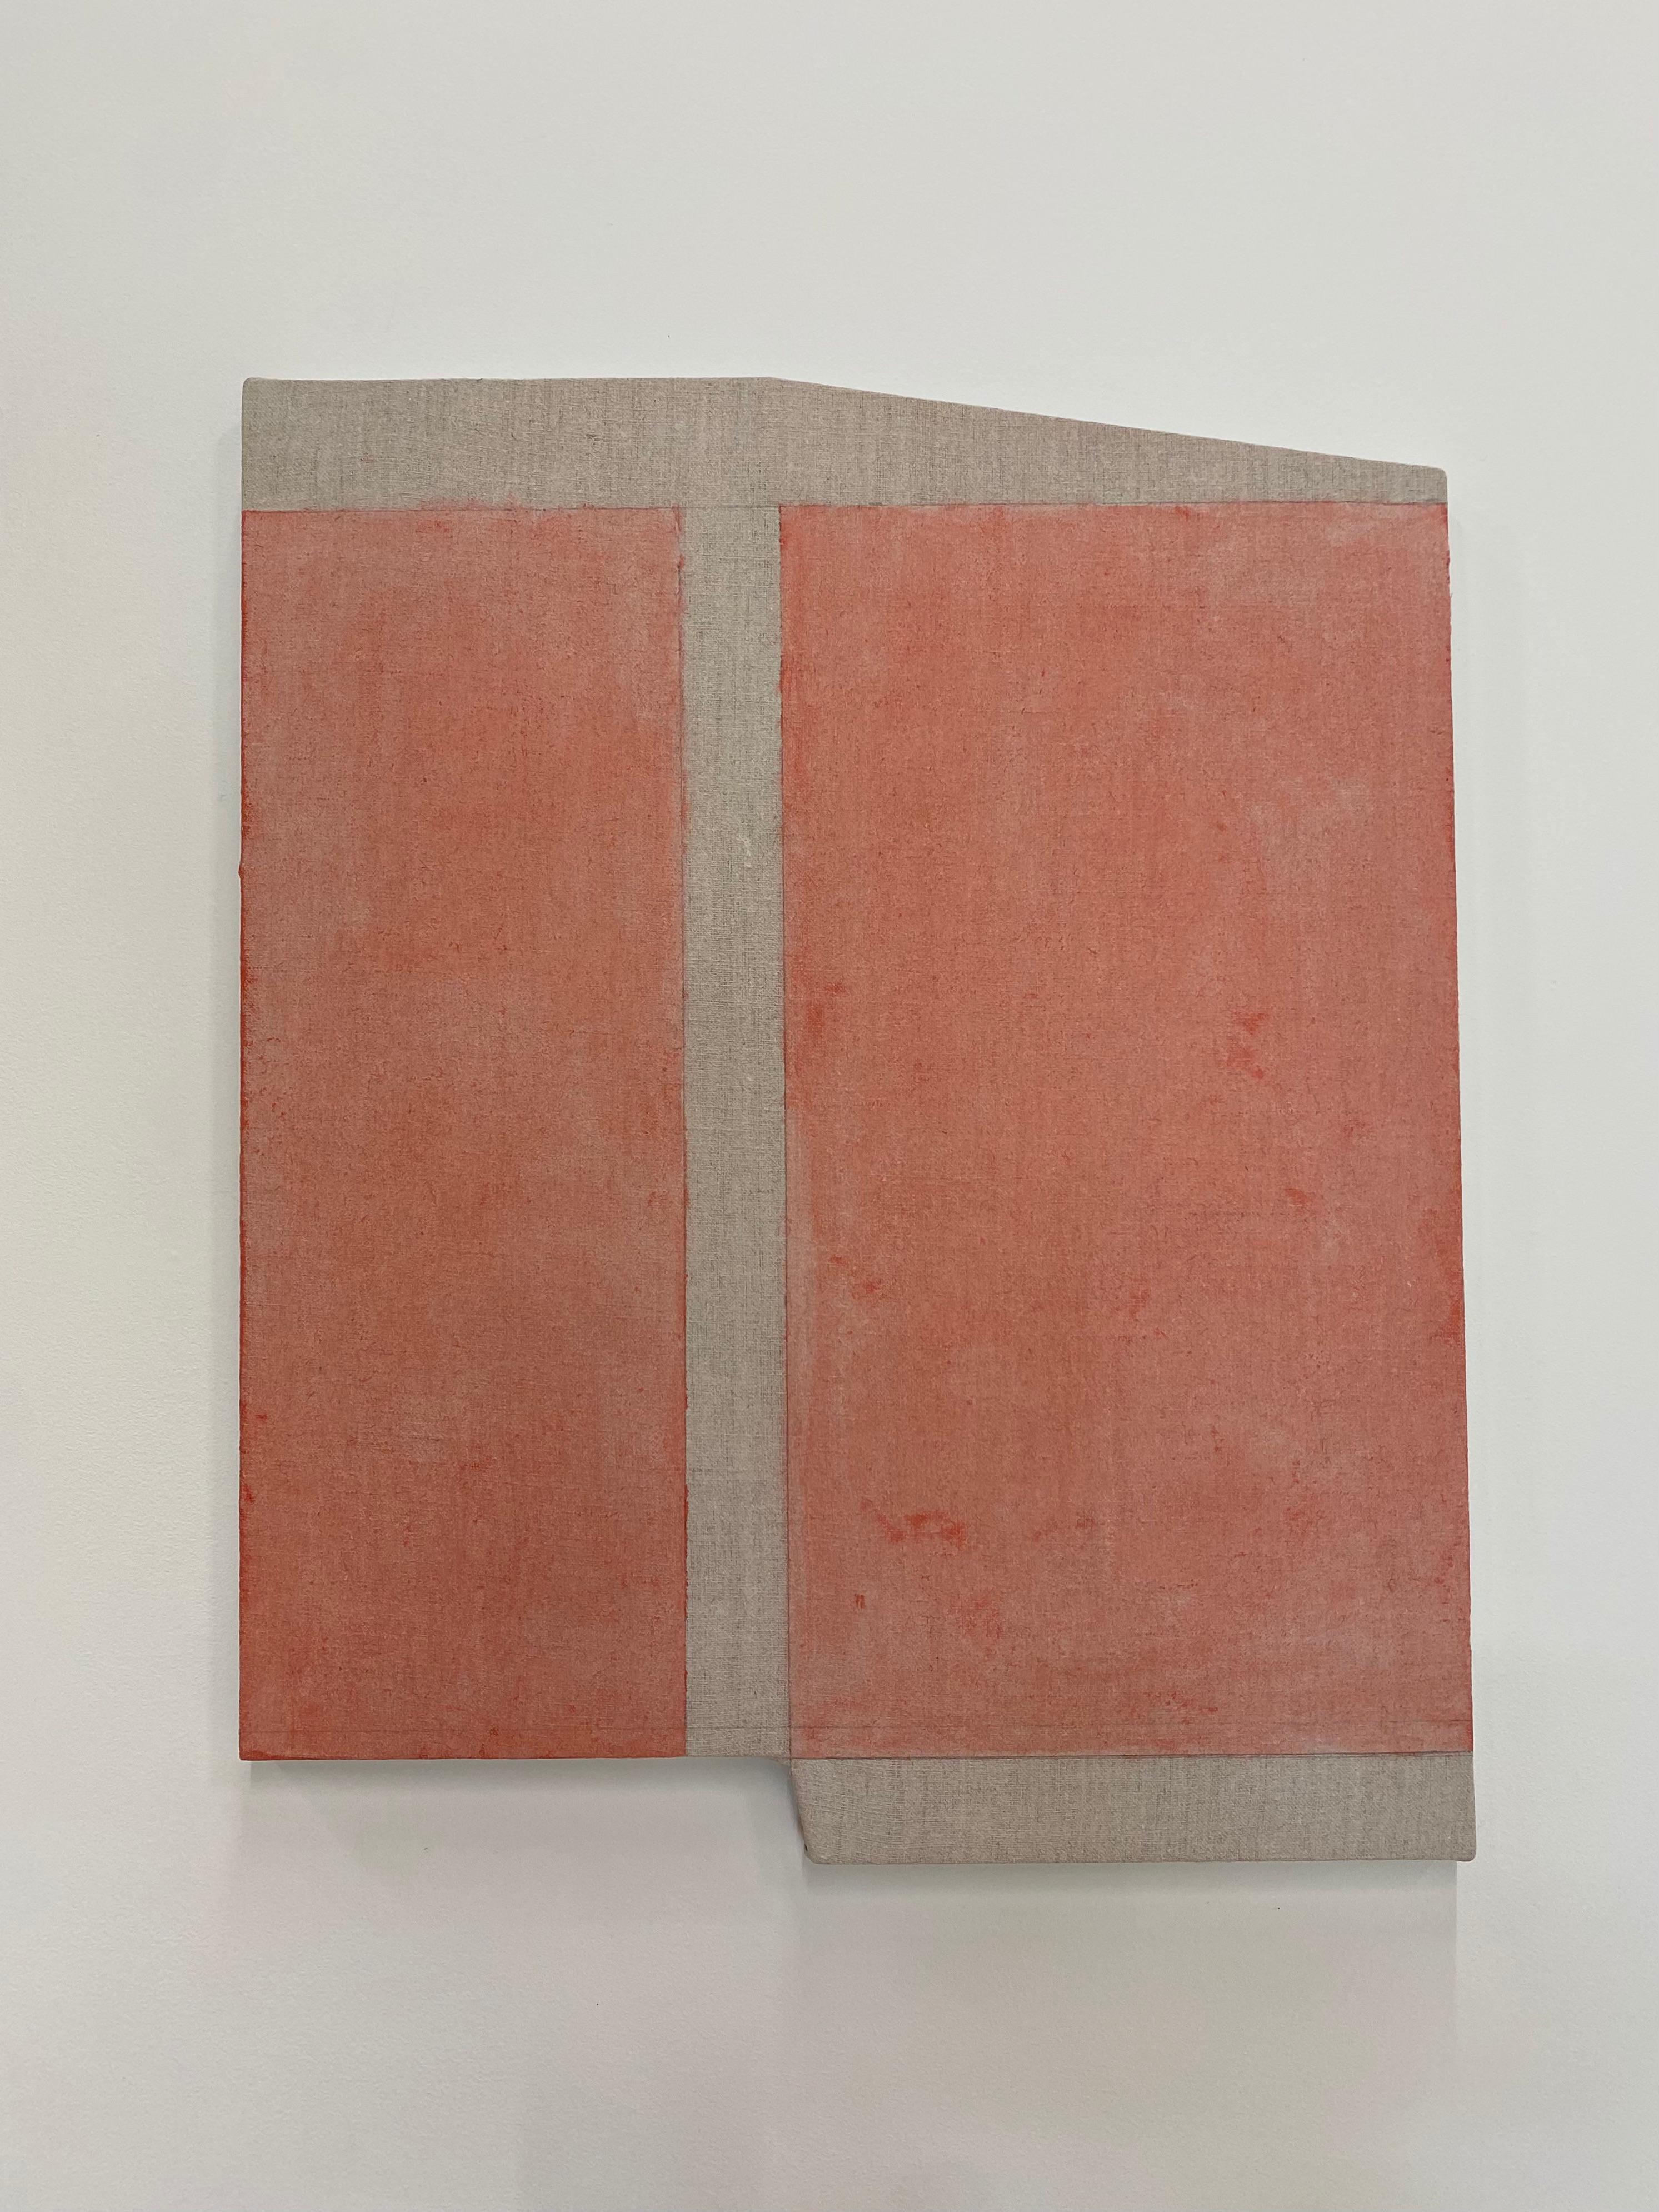 Cinnabar, Geometric Abstract, Coral Orange and Beige, Shaped Panel - Painting by Elizabeth Gourlay